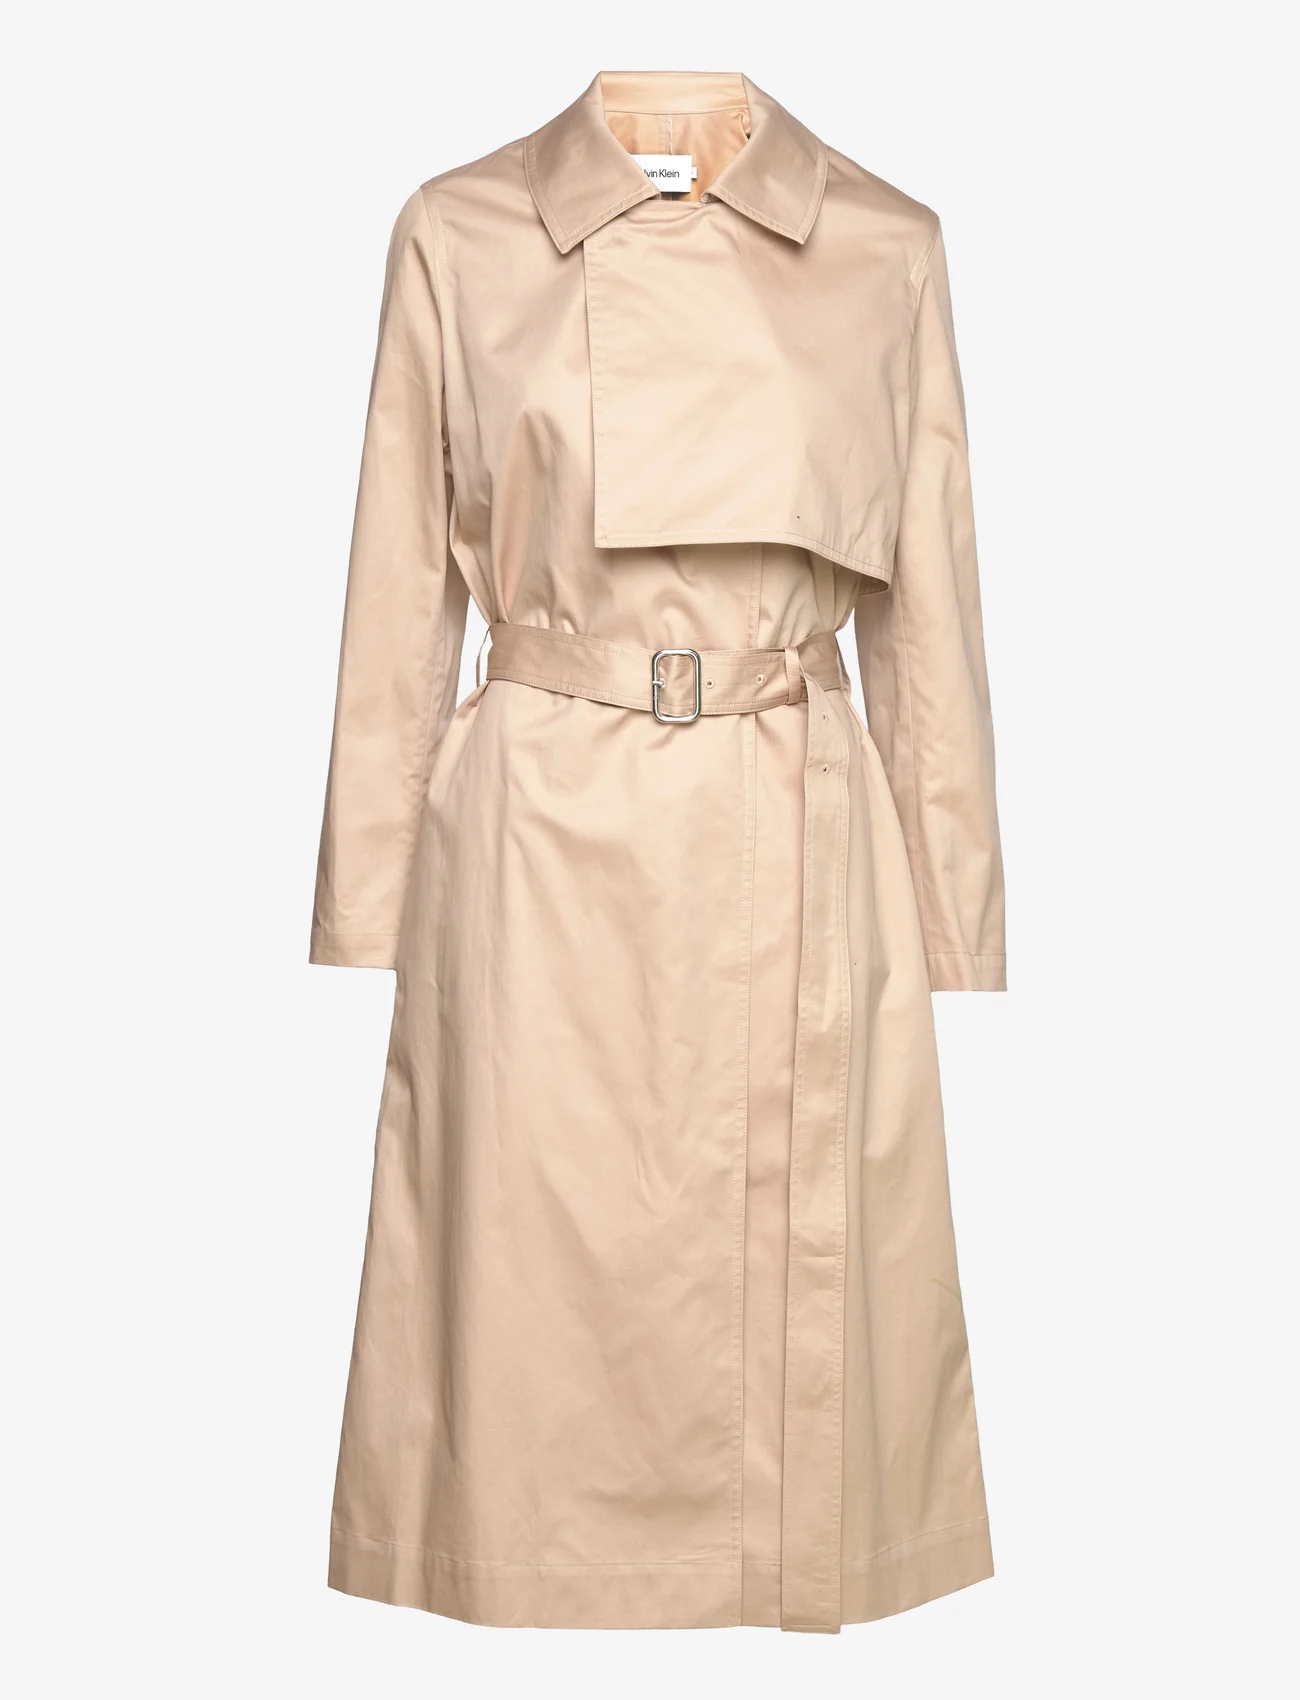 Calvin Klein Cotton Twill Trench Coat  €. Buy Trench coats from Calvin  Klein online at . Fast delivery and easy returns